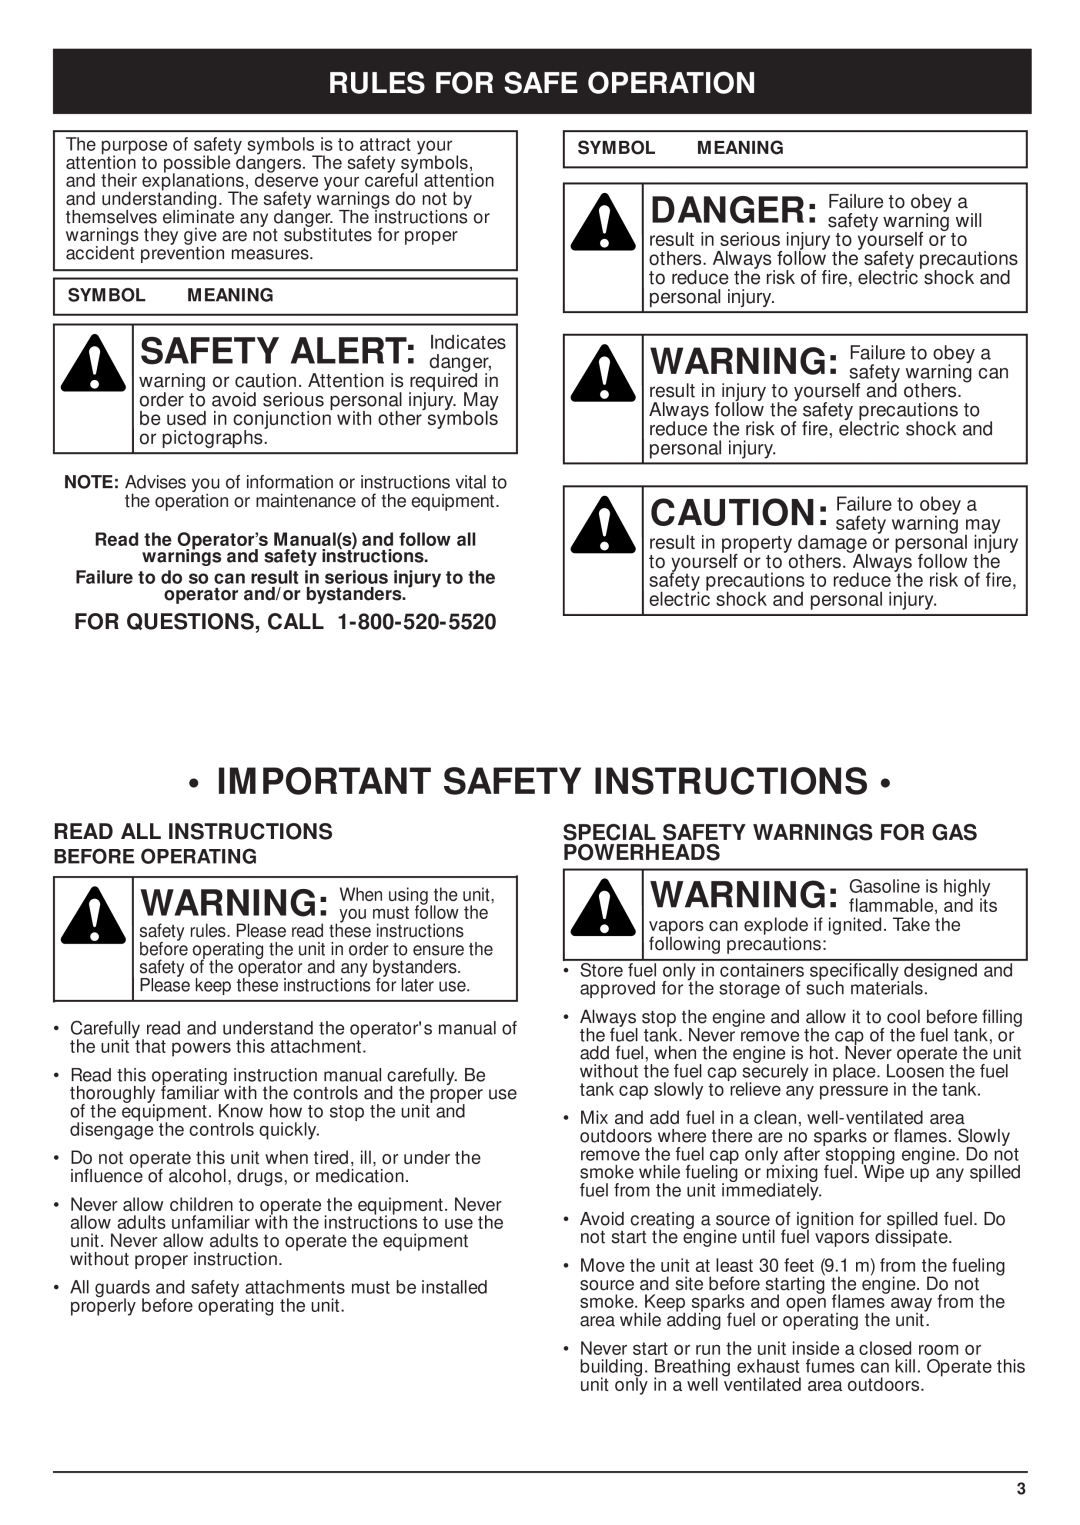 MTD TBPS manual Important Safety Instructions, Rules For Safe Operation, For Questions, Call, Read All Instructions 